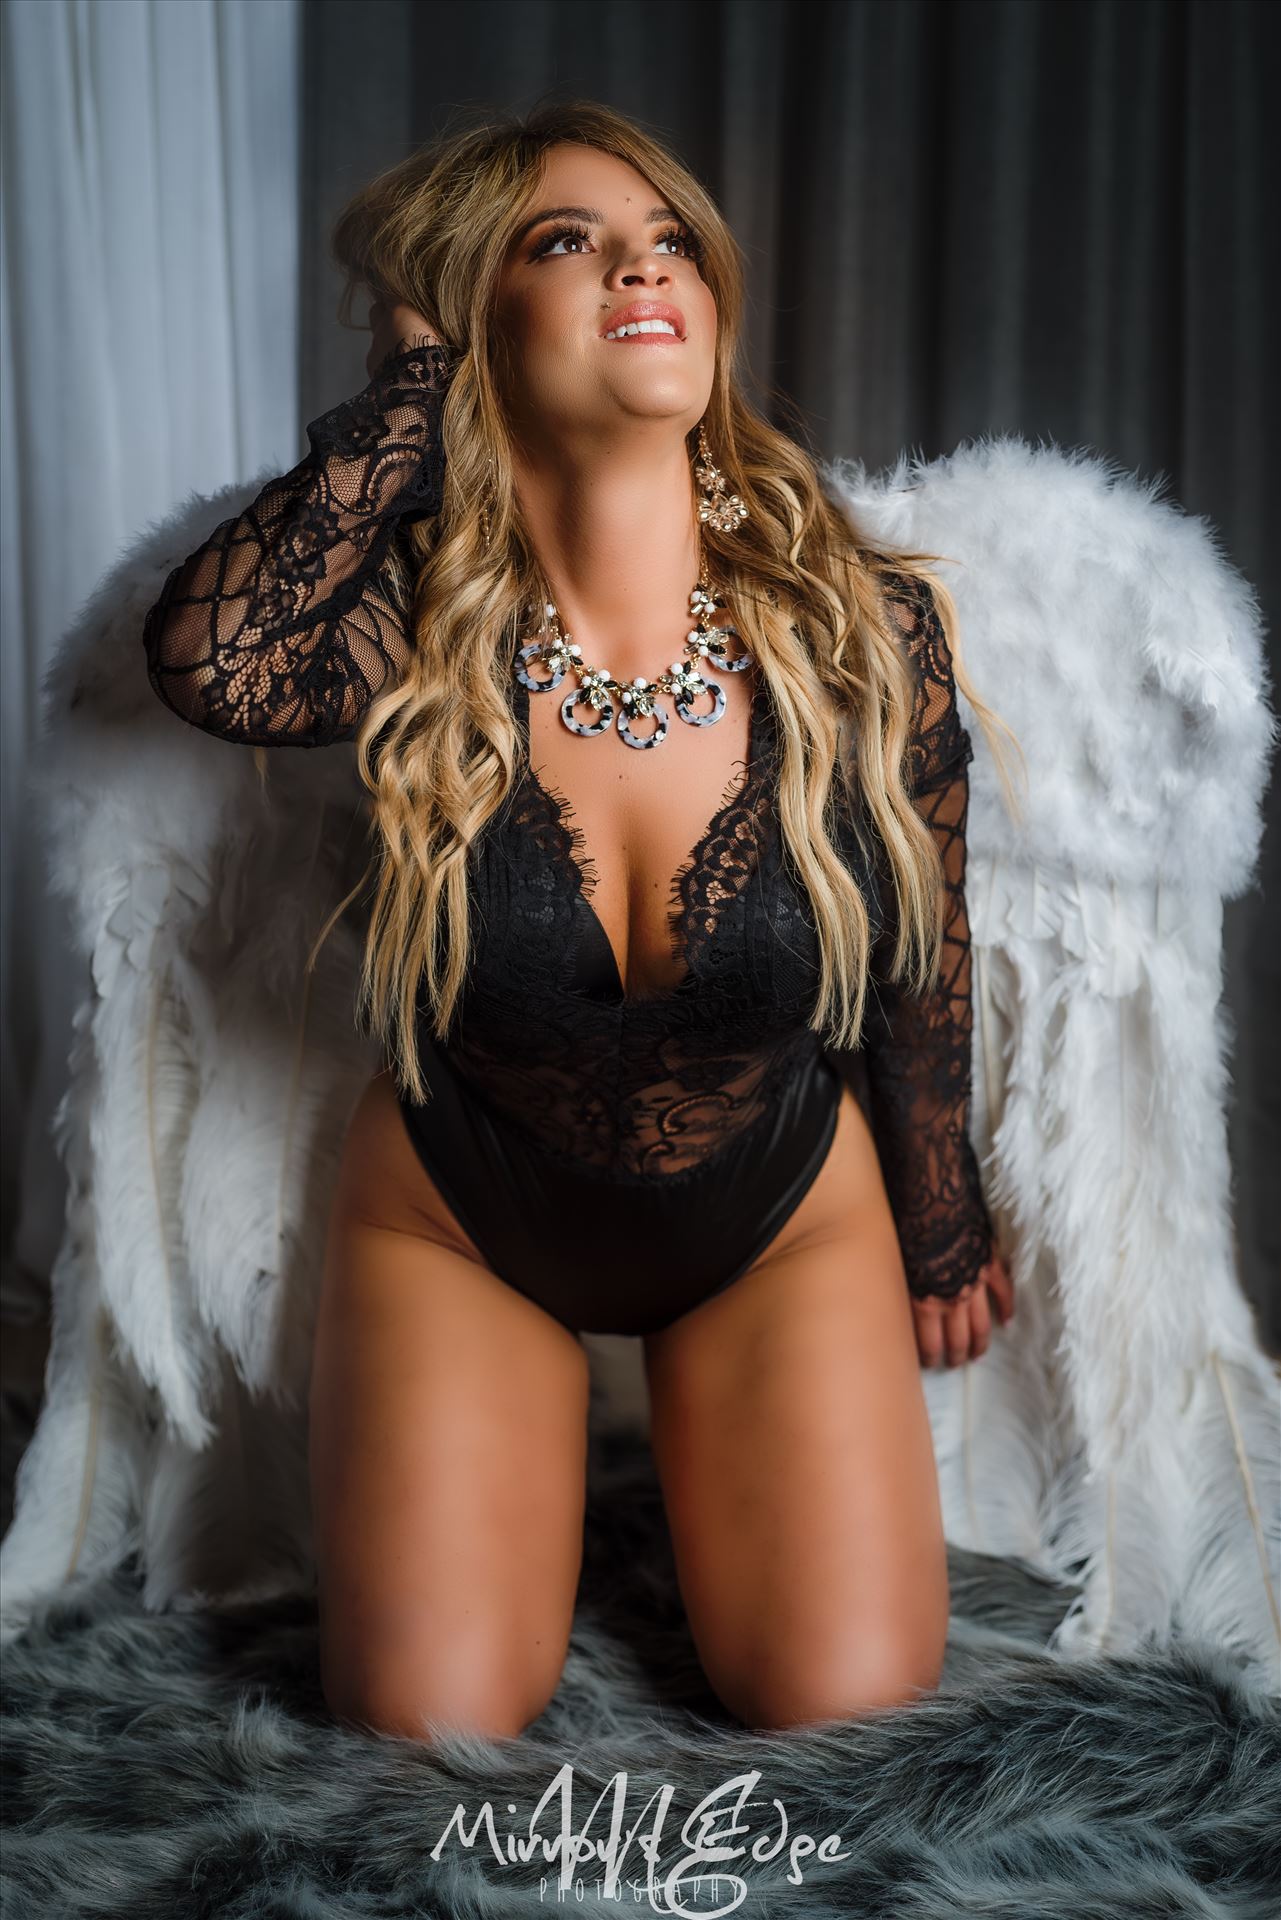 Port WM-5572.JPG - Beachfront Boudoir by Mirror's Edge Photography is a Boutique Luxury Boudoir Photography Studio located just blocks from the beach in Oceano, California. My mission is to show as many women as possible how beautiful they truly are! by Sarah Williams